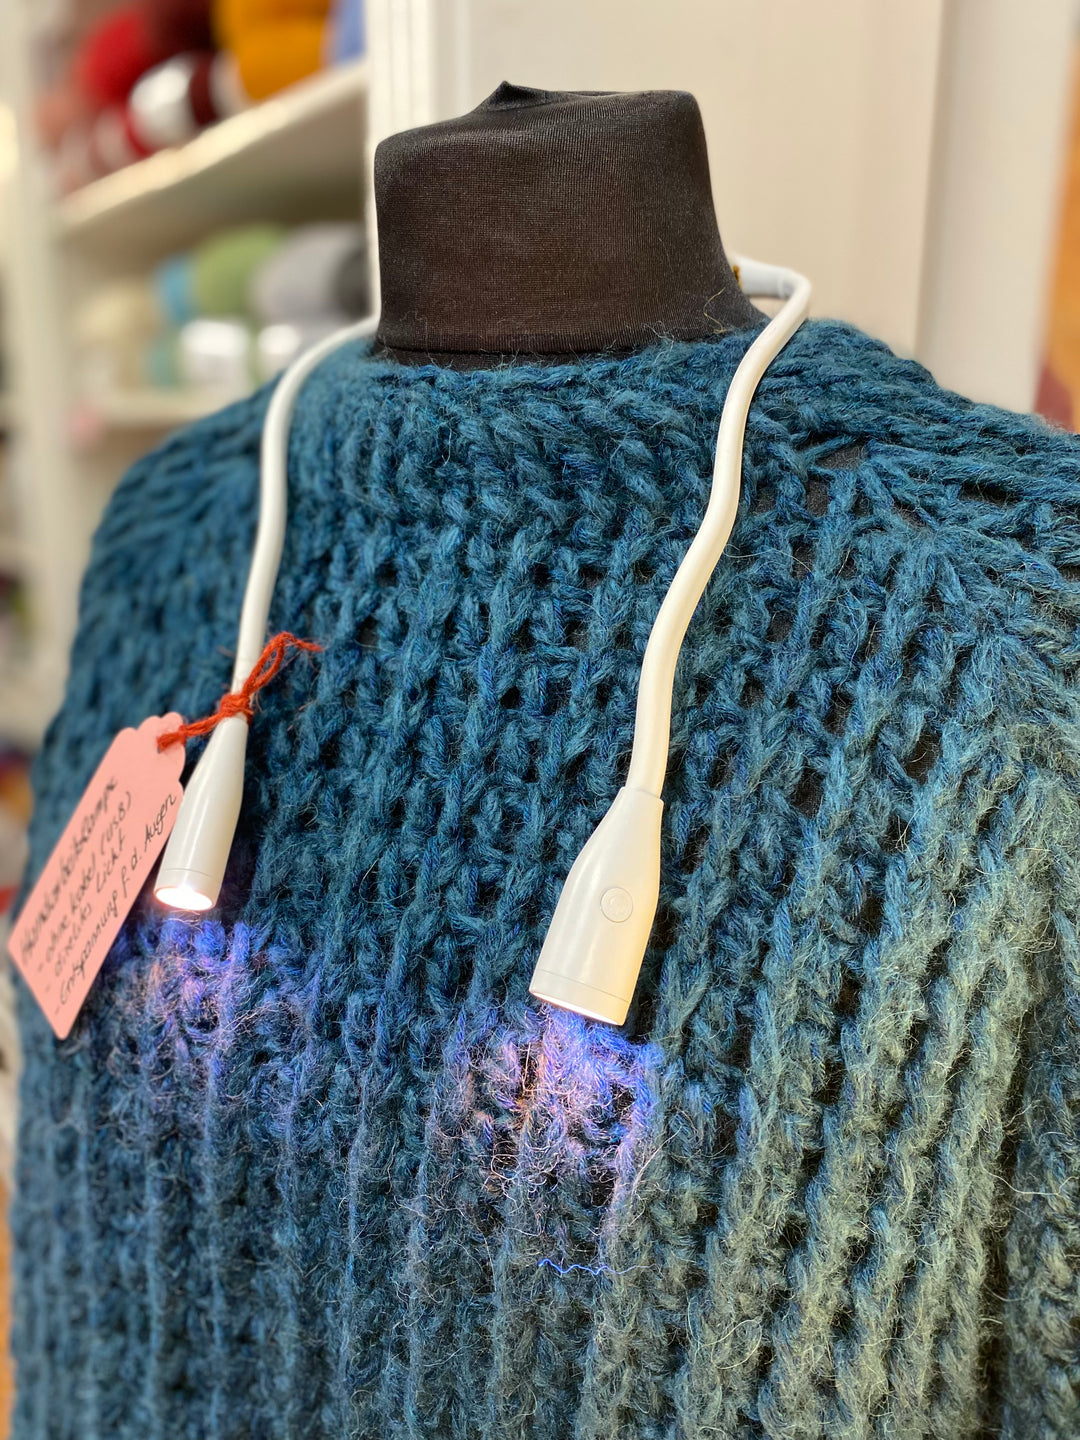 Handcraft lamp / knitting lamp to hang around your neck